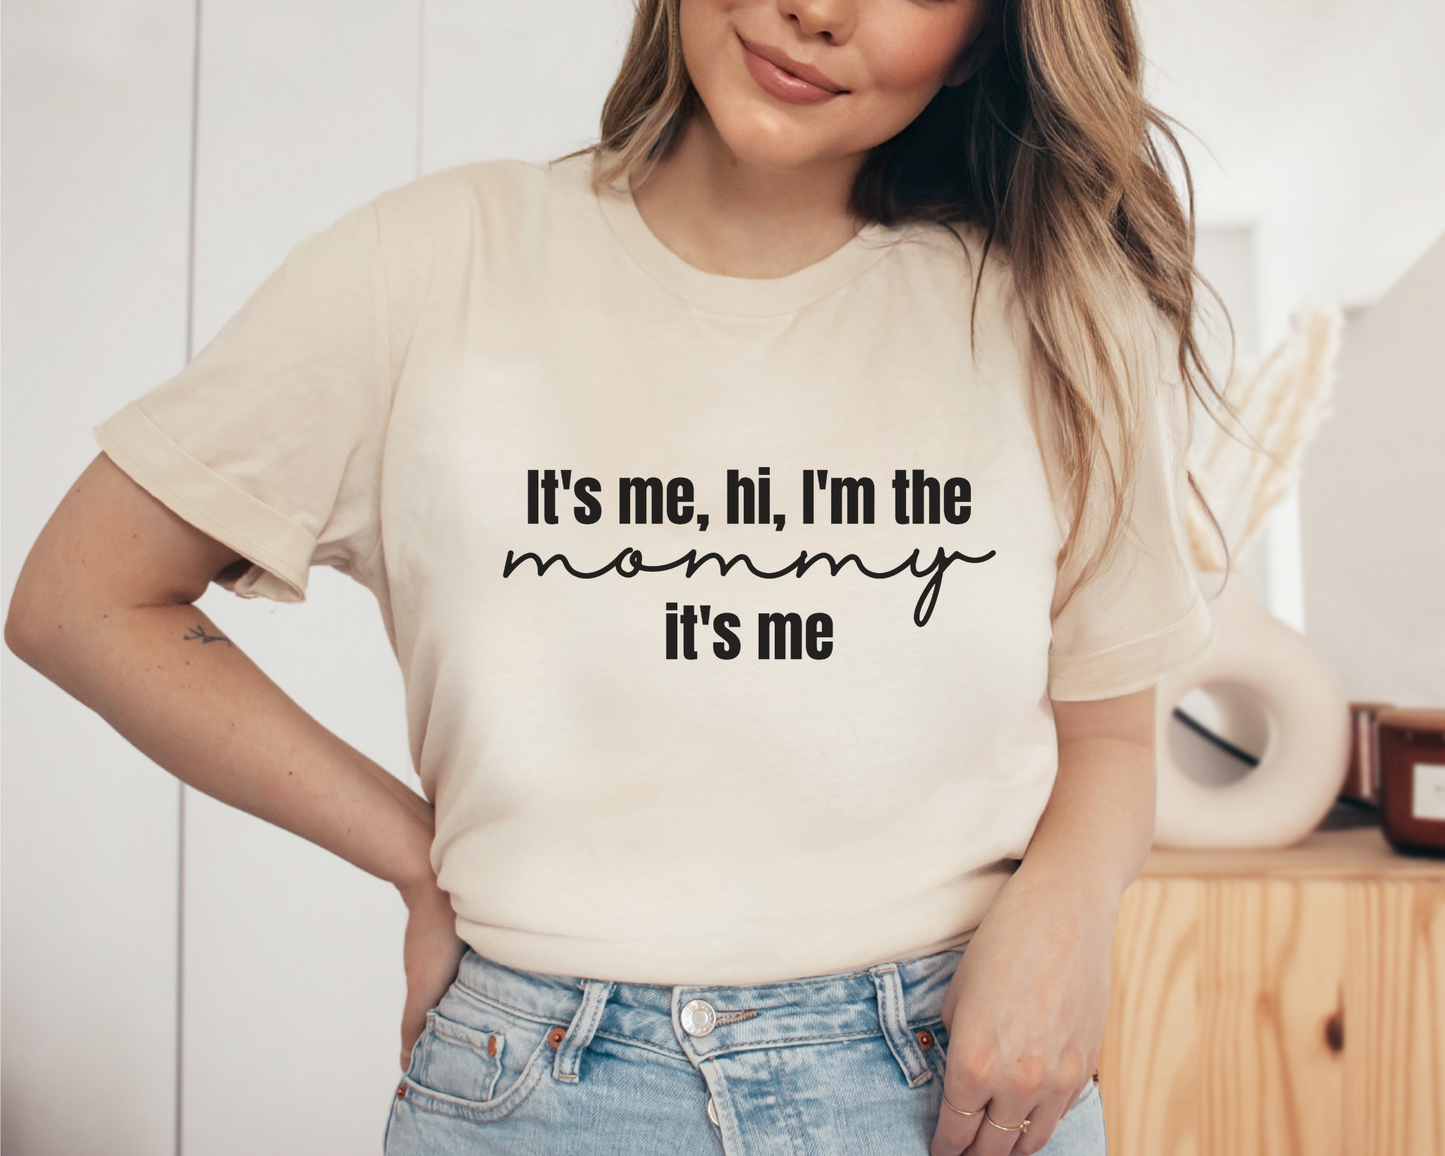 I'm the Mommy, Funny Mom Shirt for Mother's Day, Mom Birthday, Mommy Shirt, Bella and Canvas Cute Mom Shirts, Best Mom